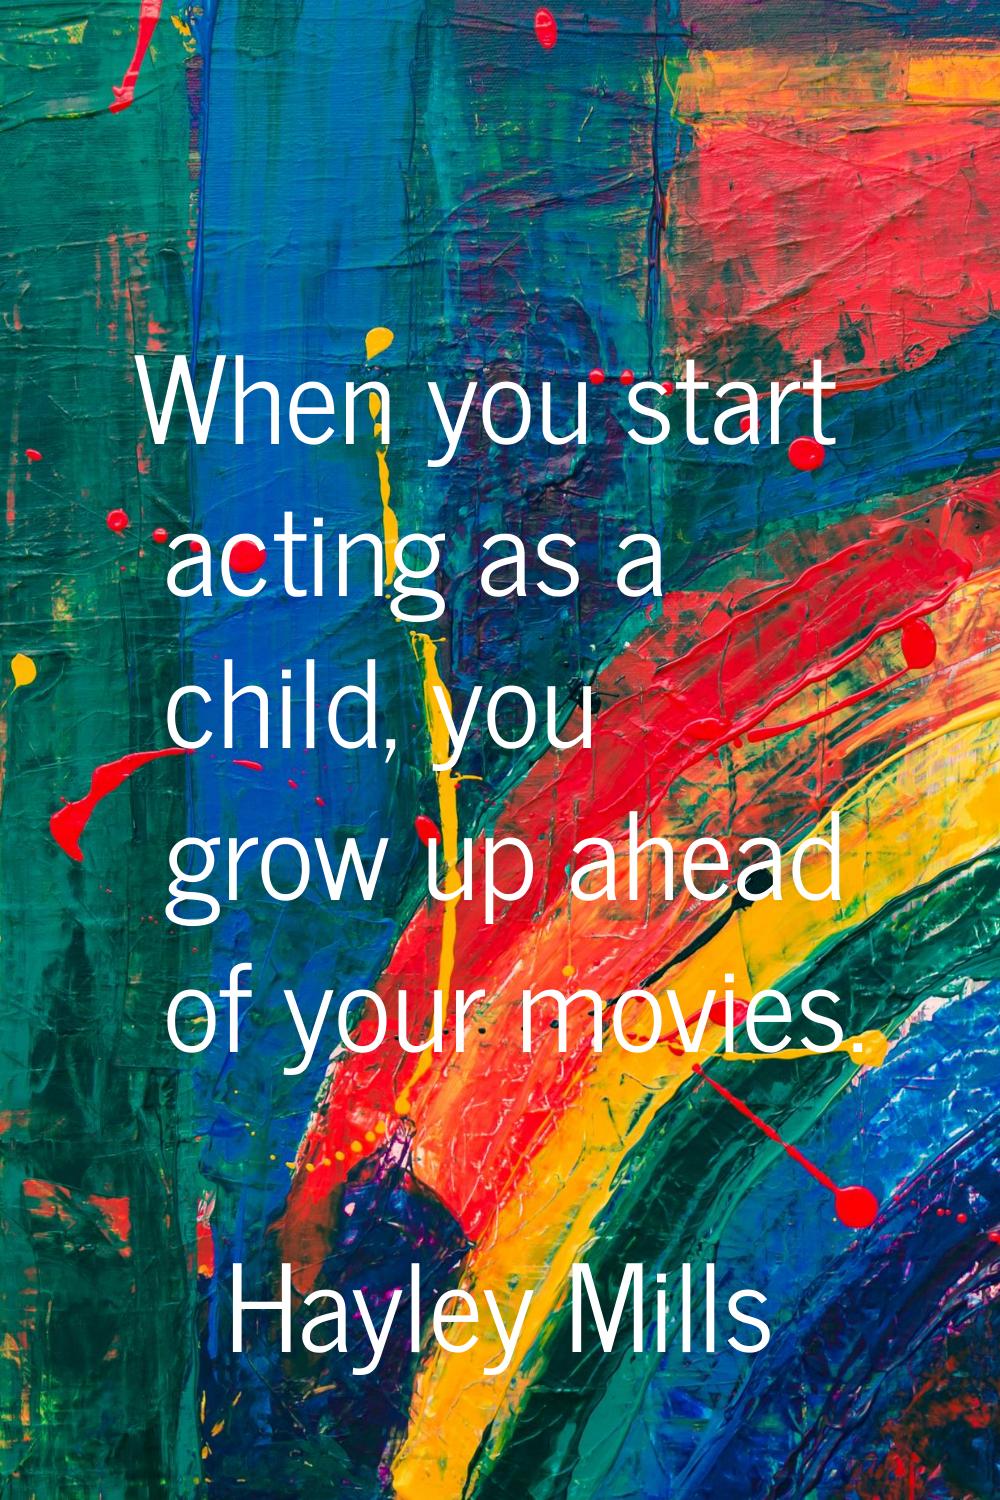 When you start acting as a child, you grow up ahead of your movies.